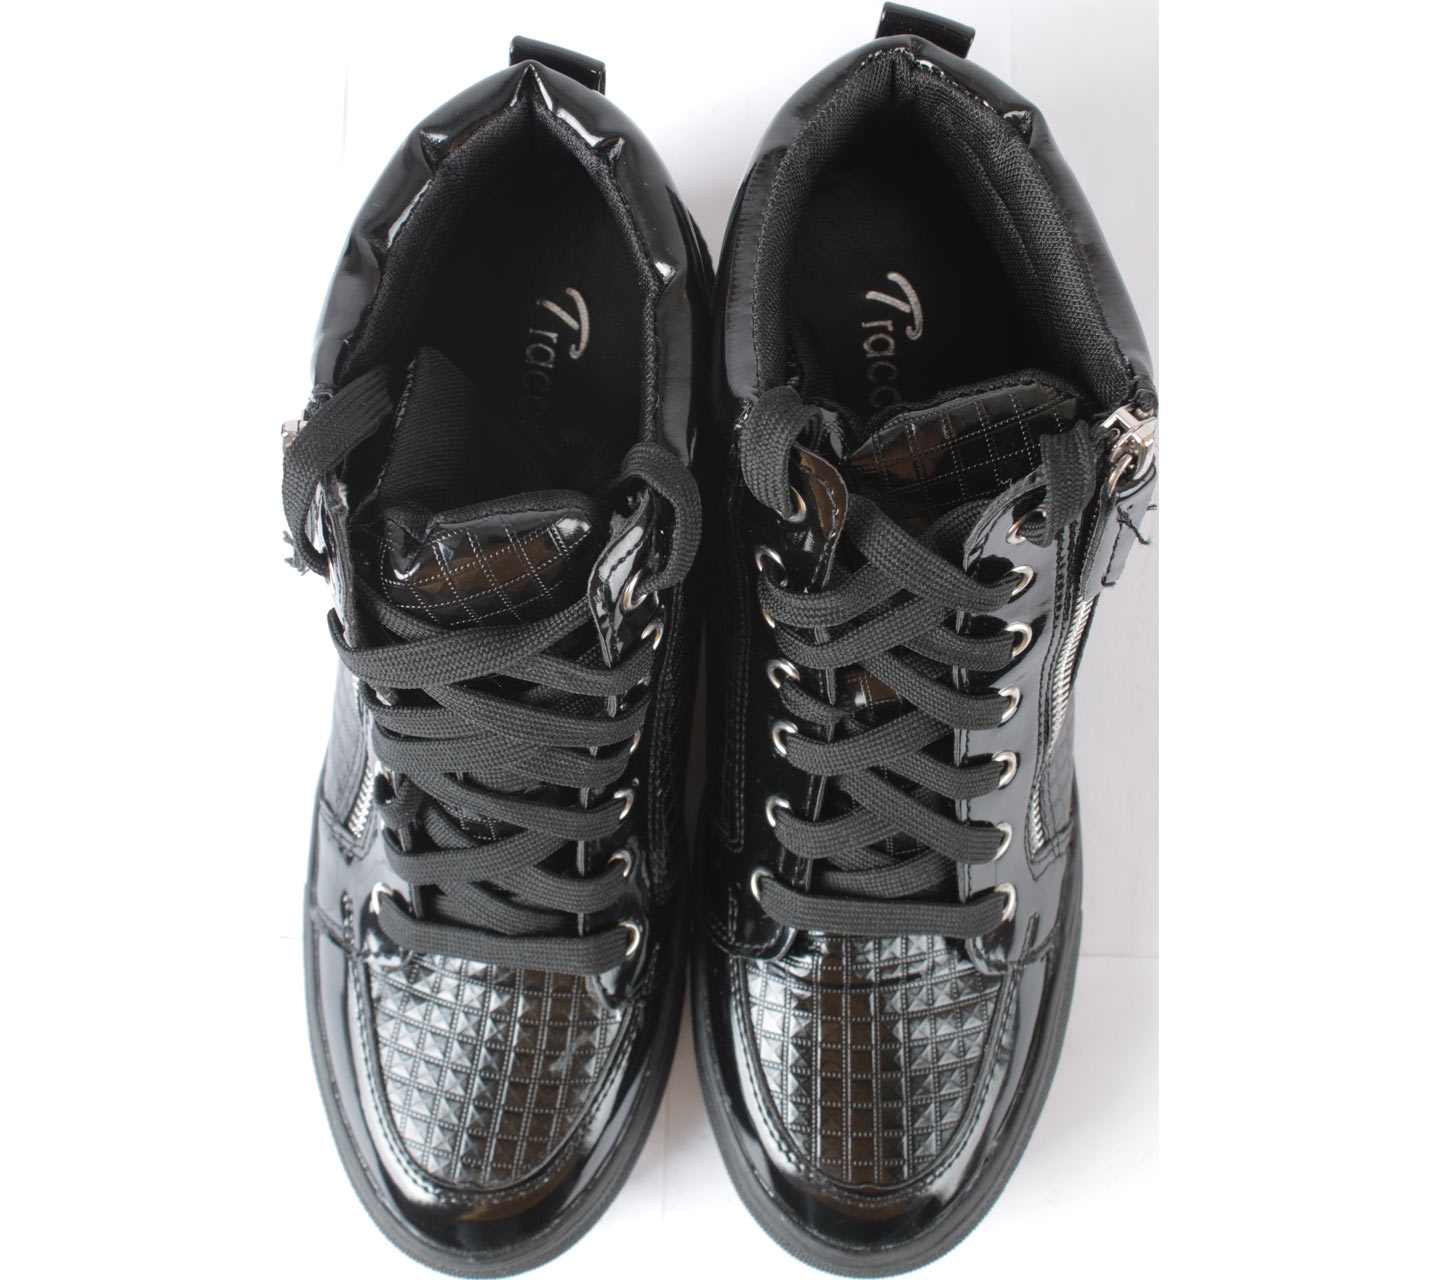 Tracce Black Wedges Sneakers